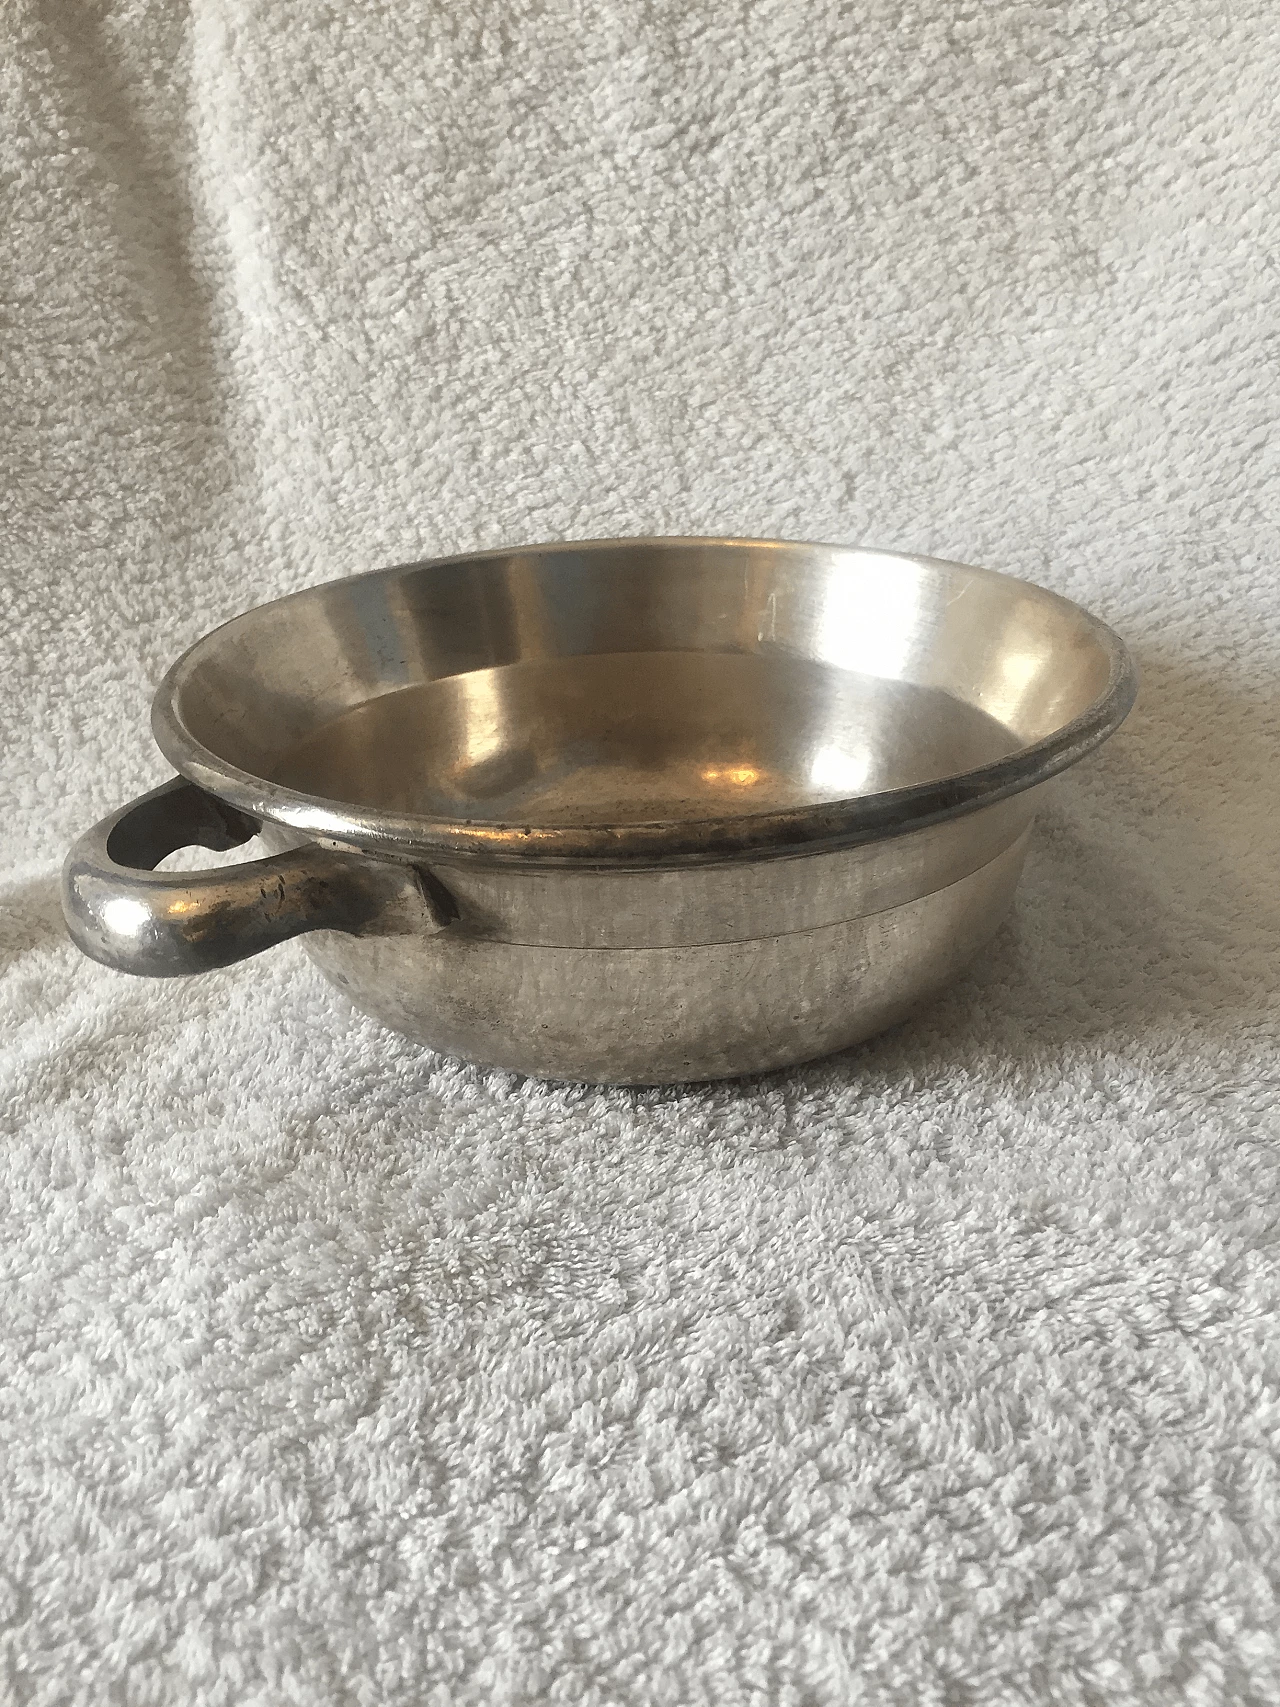 Silver-plated serving bowl by Gio' Ponti for the Calderoni brothers, 1950s 1367346